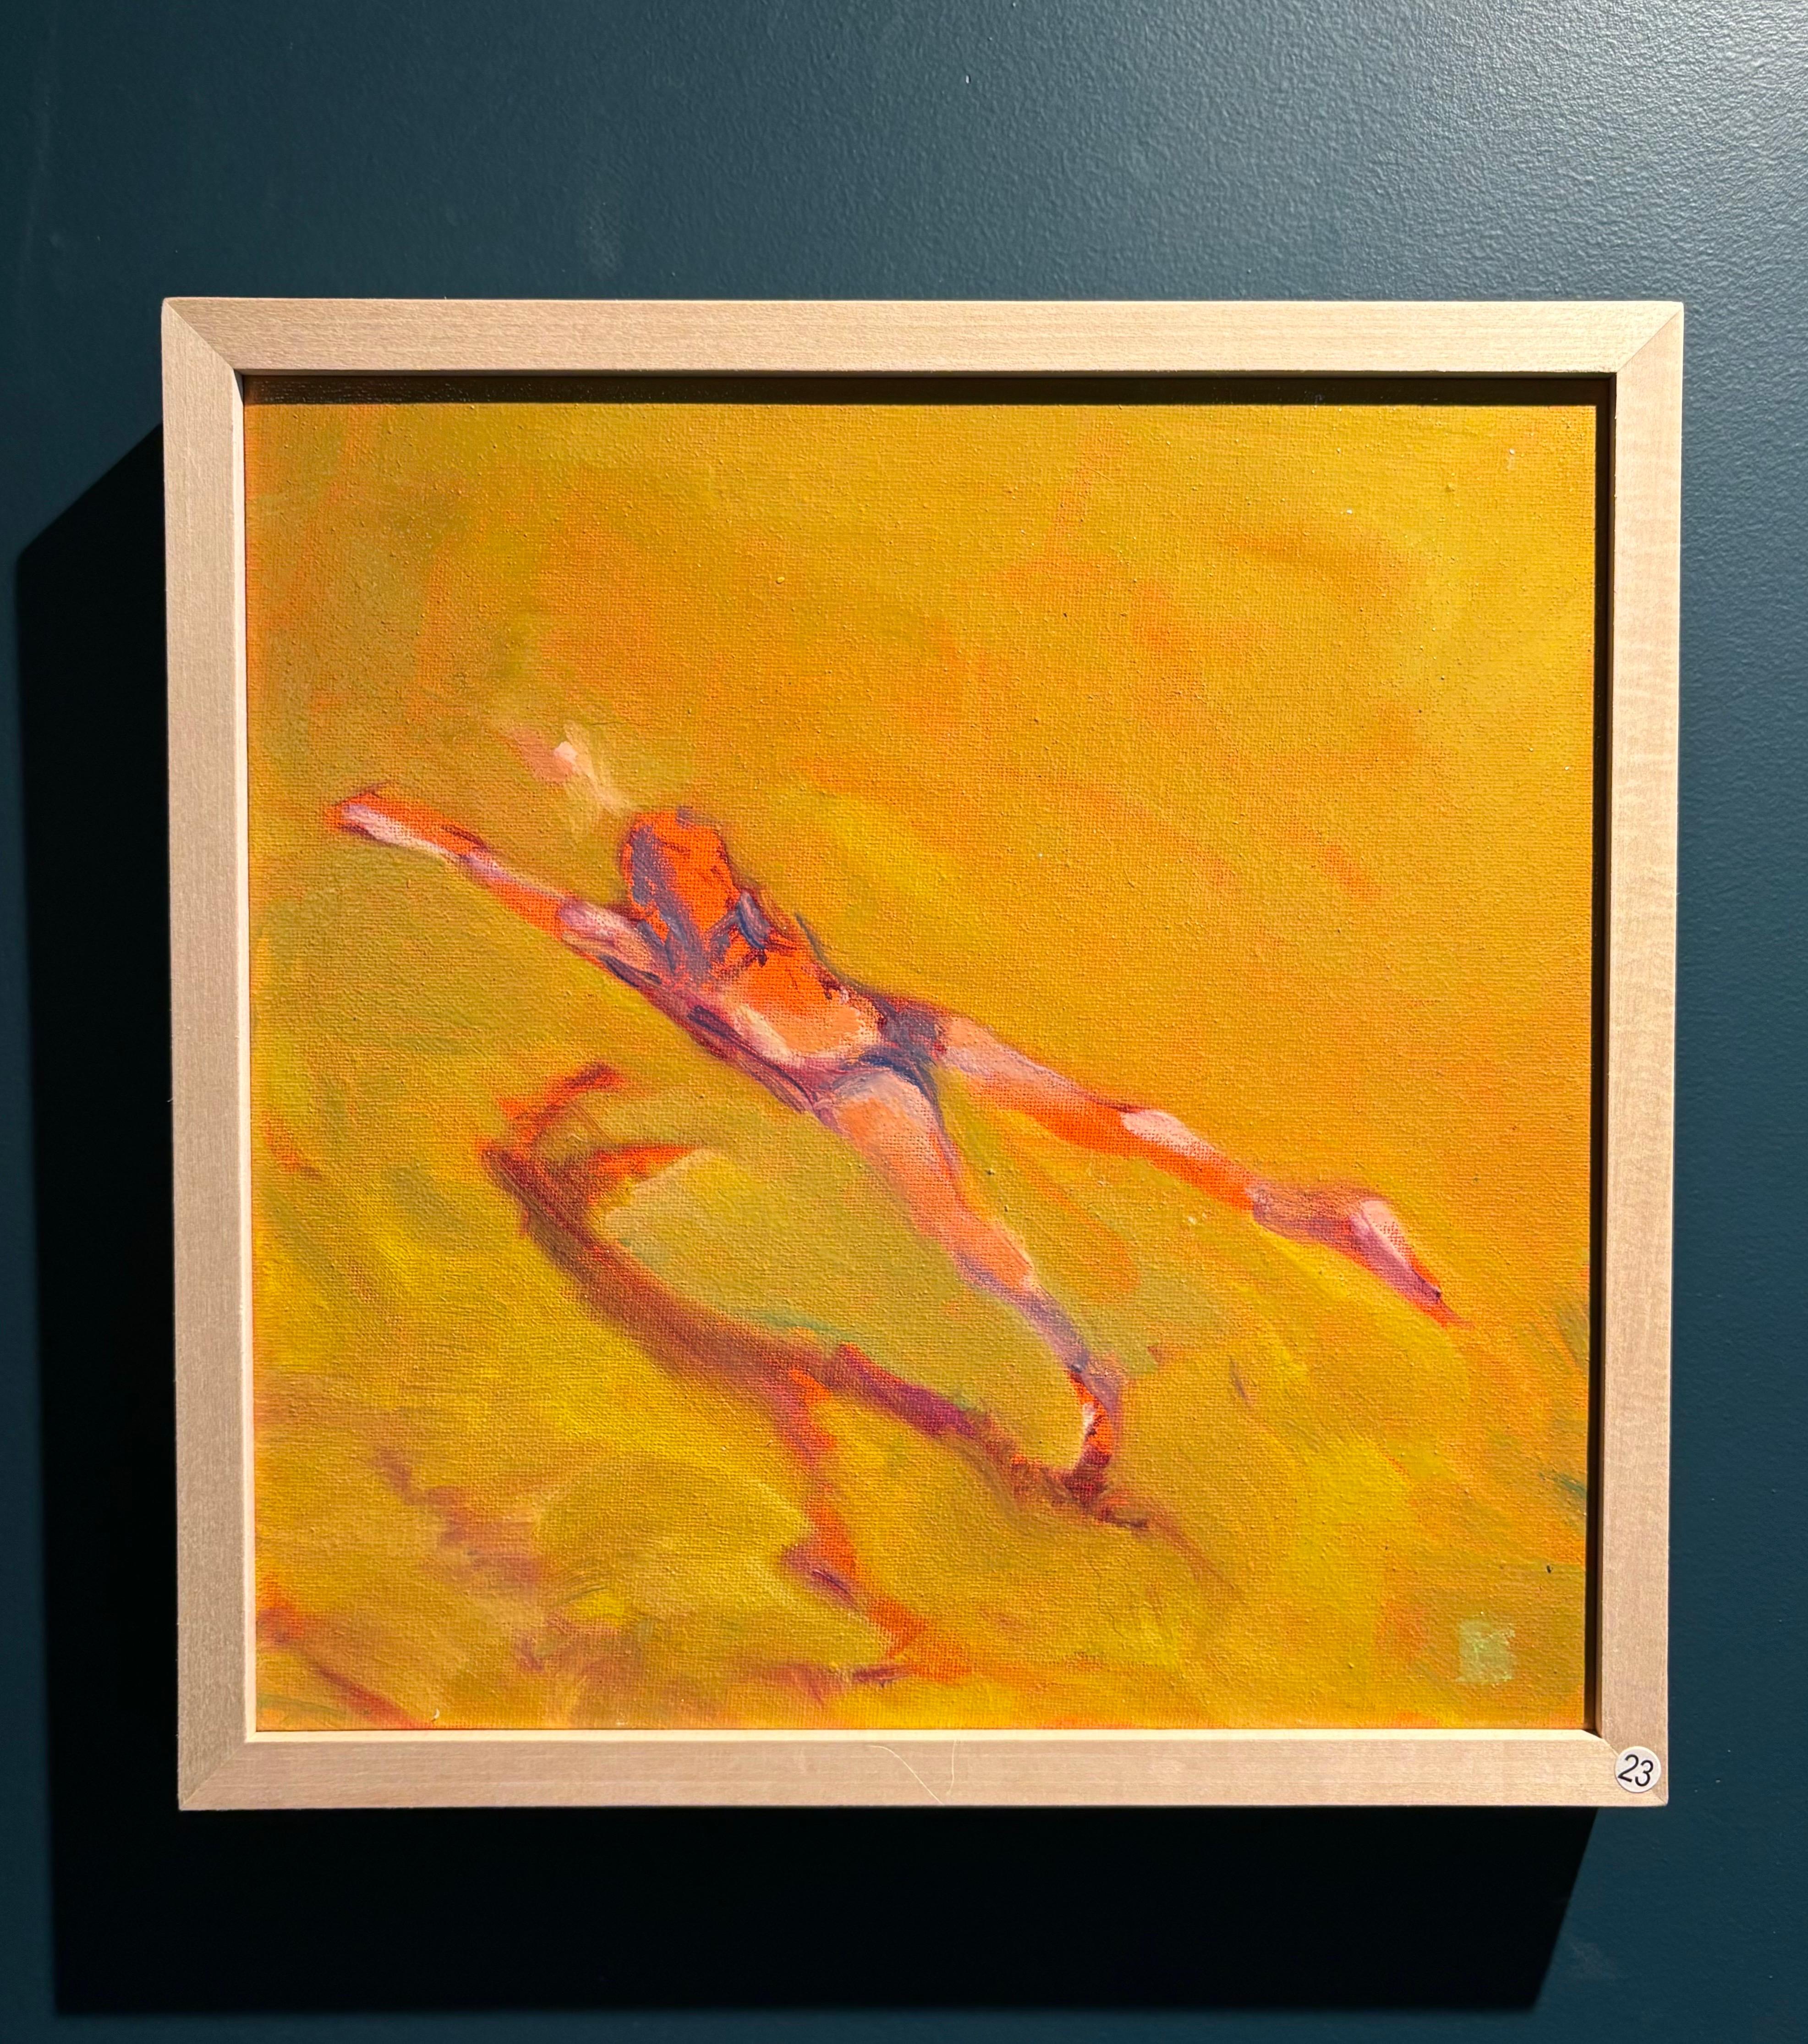 Water,Swimmer, sea,yellow Summer

1981-86, Educated from the Academy of Fine Arts, Odense
First solo exhibition in 1983

Artist statement:

“I am a painter. I am fascinated by the difference in cold and warm colors and the different atmospheres that